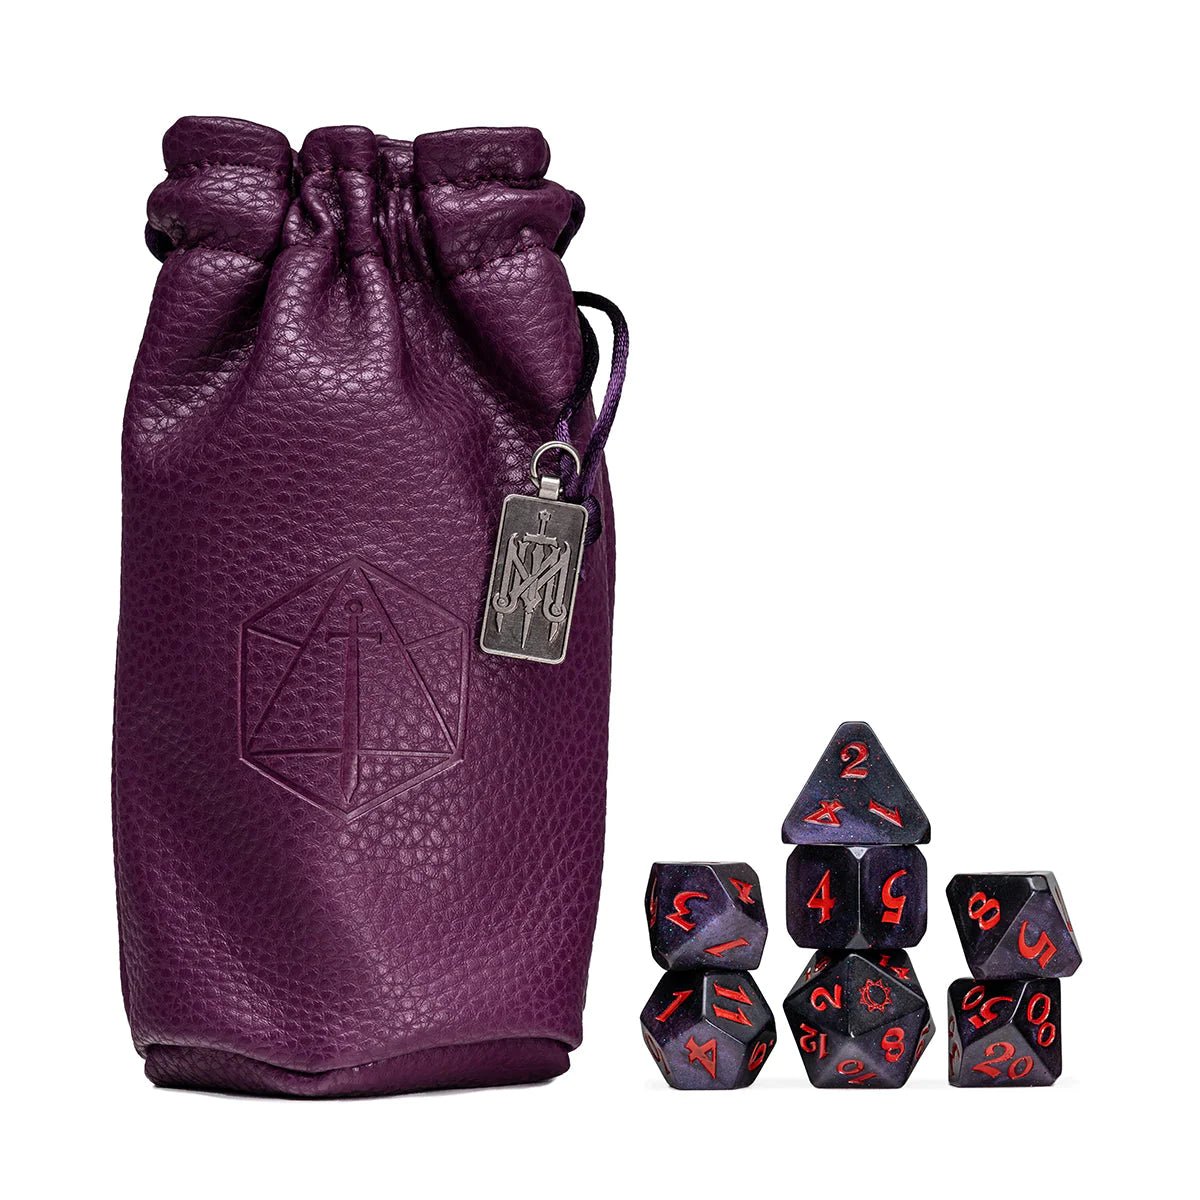 Mighty Nein Dice Set: Mollymauk Tealeaf (Purple/Red) - The Fourth Place